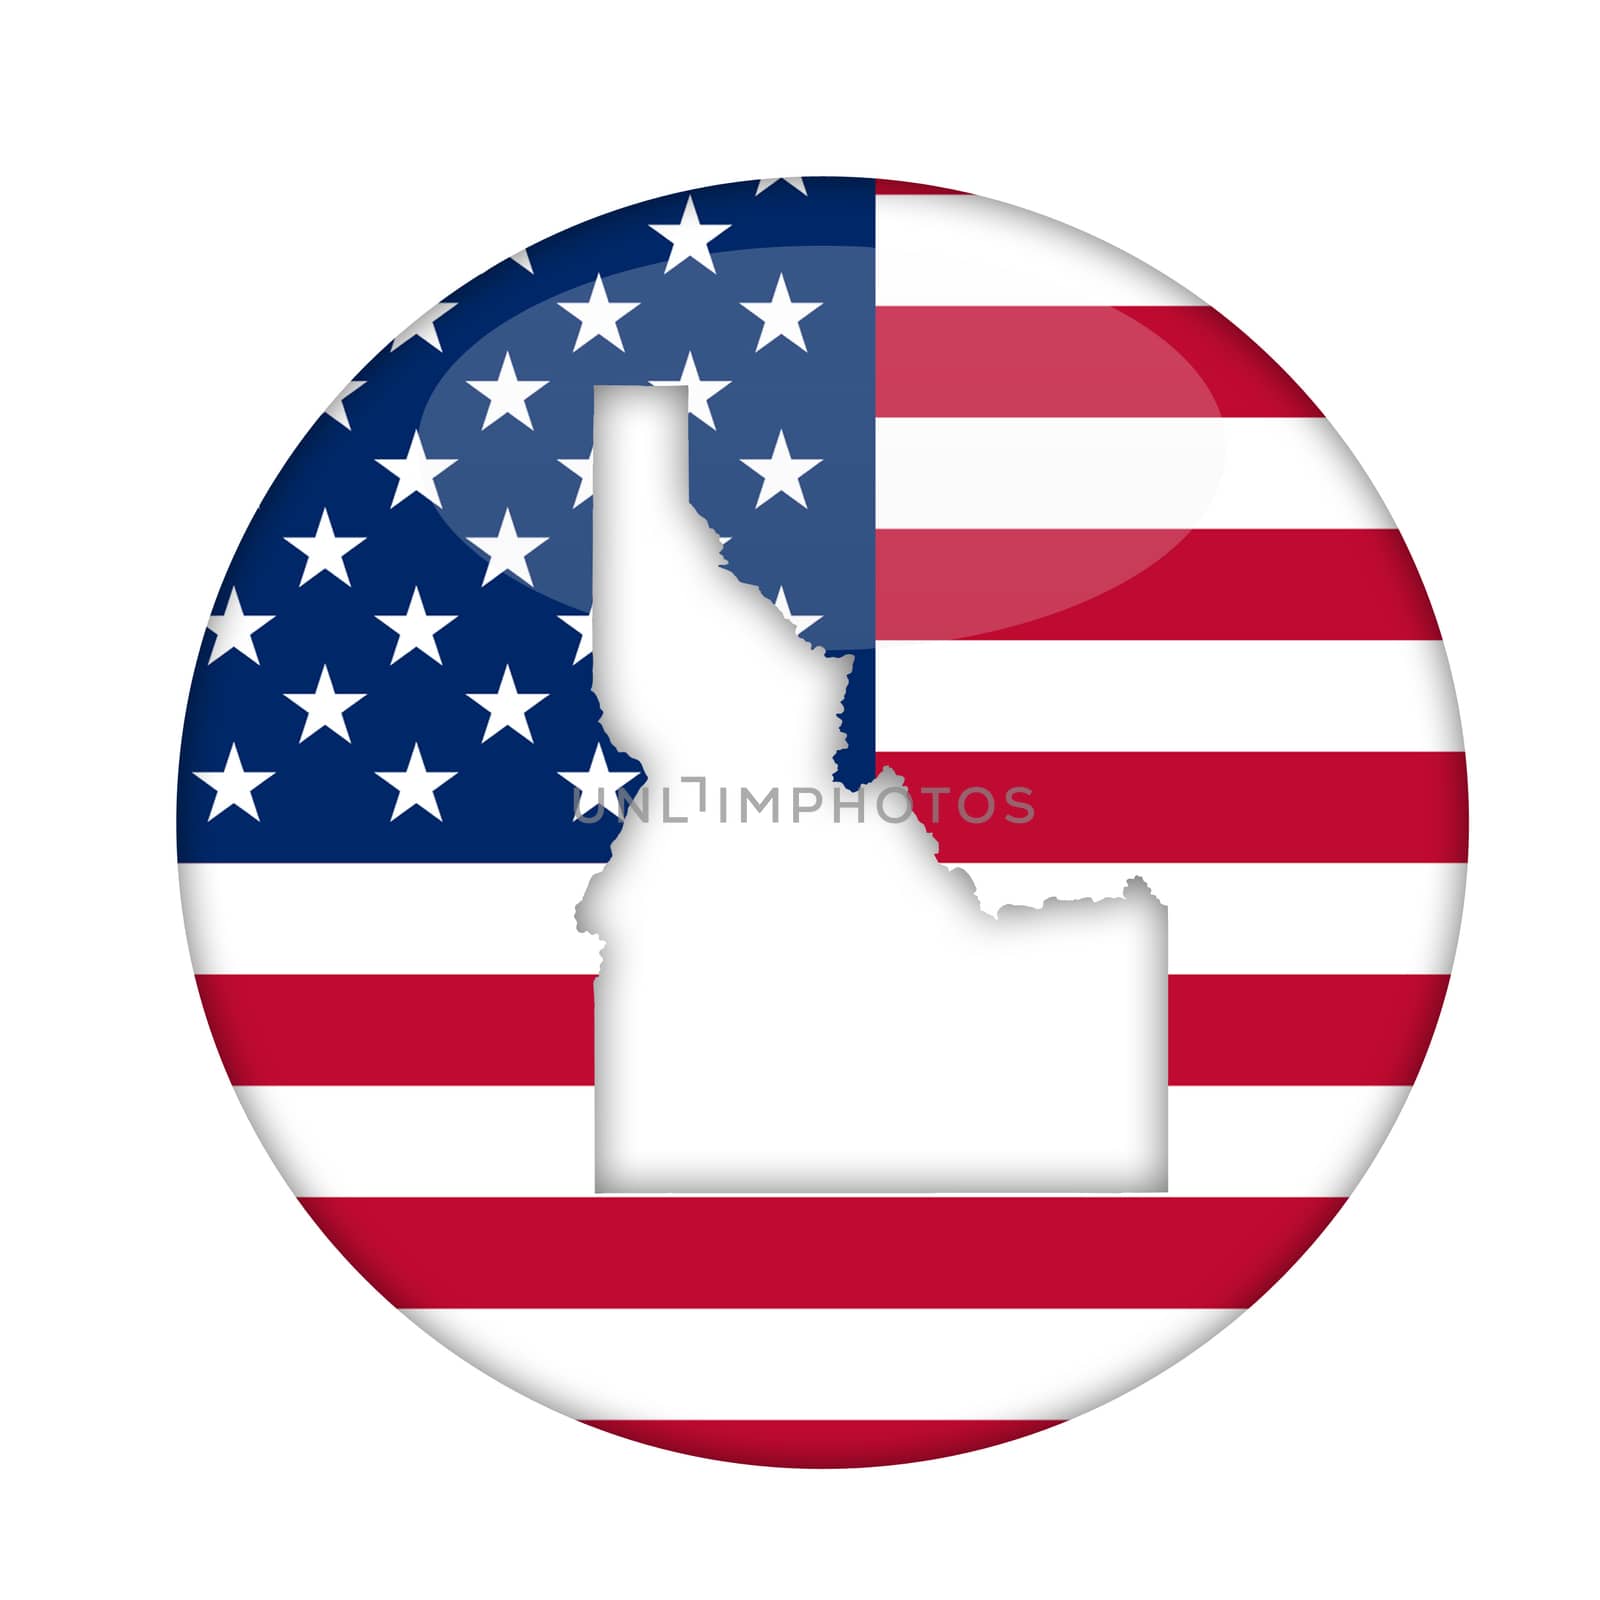 Idaho state of America badge by speedfighter